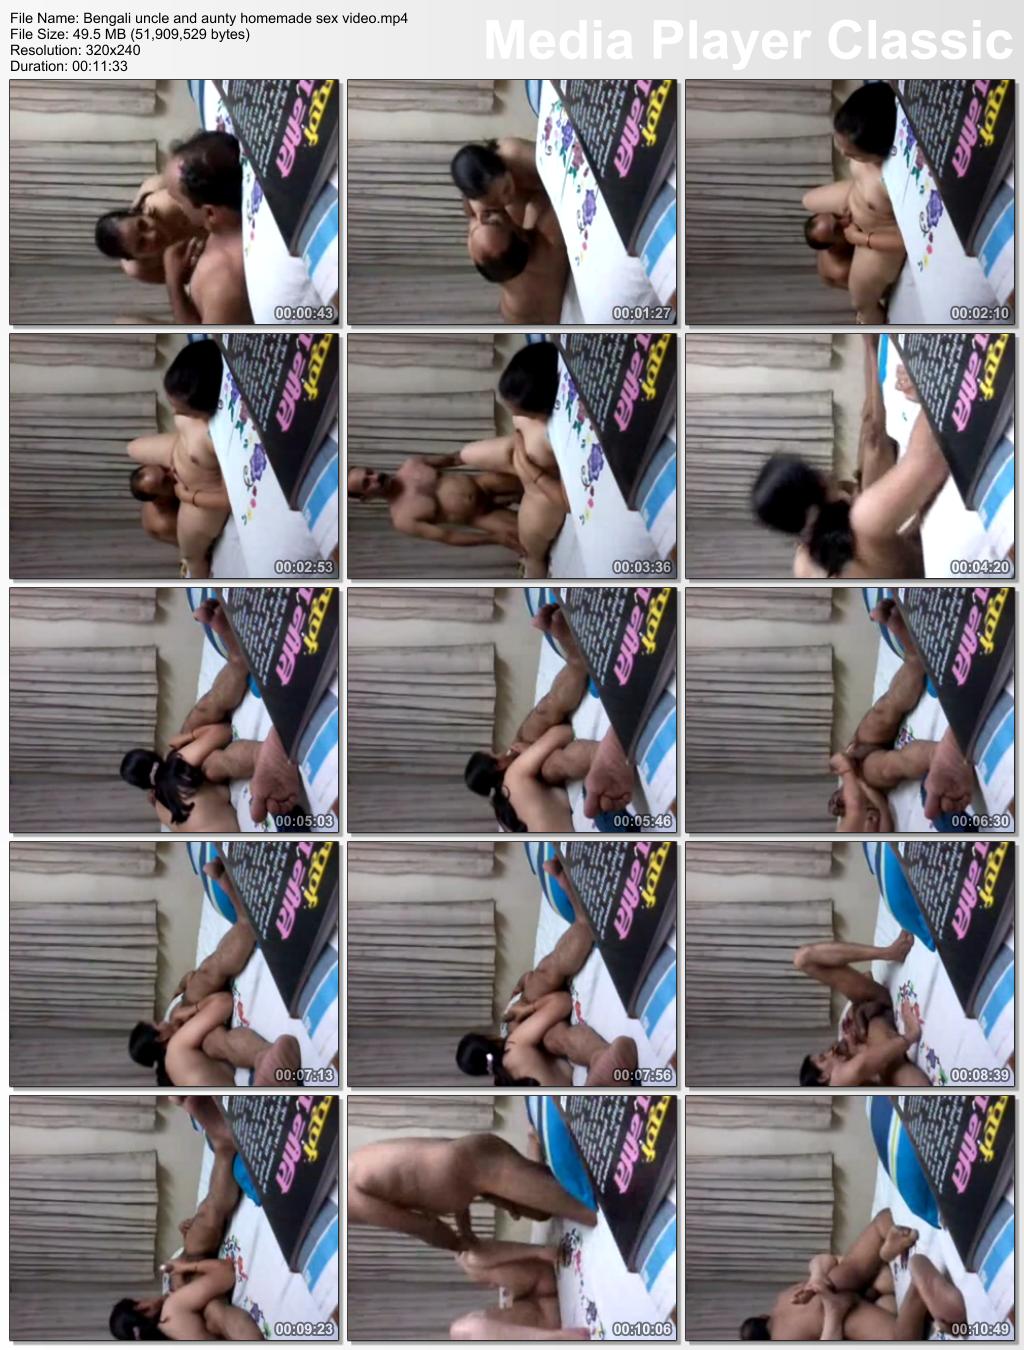 Bengali_uncle_and_aunty_homemade_sex_video.mp4_thumbs__5B2014.05.05_09.54.46_5D.jpg